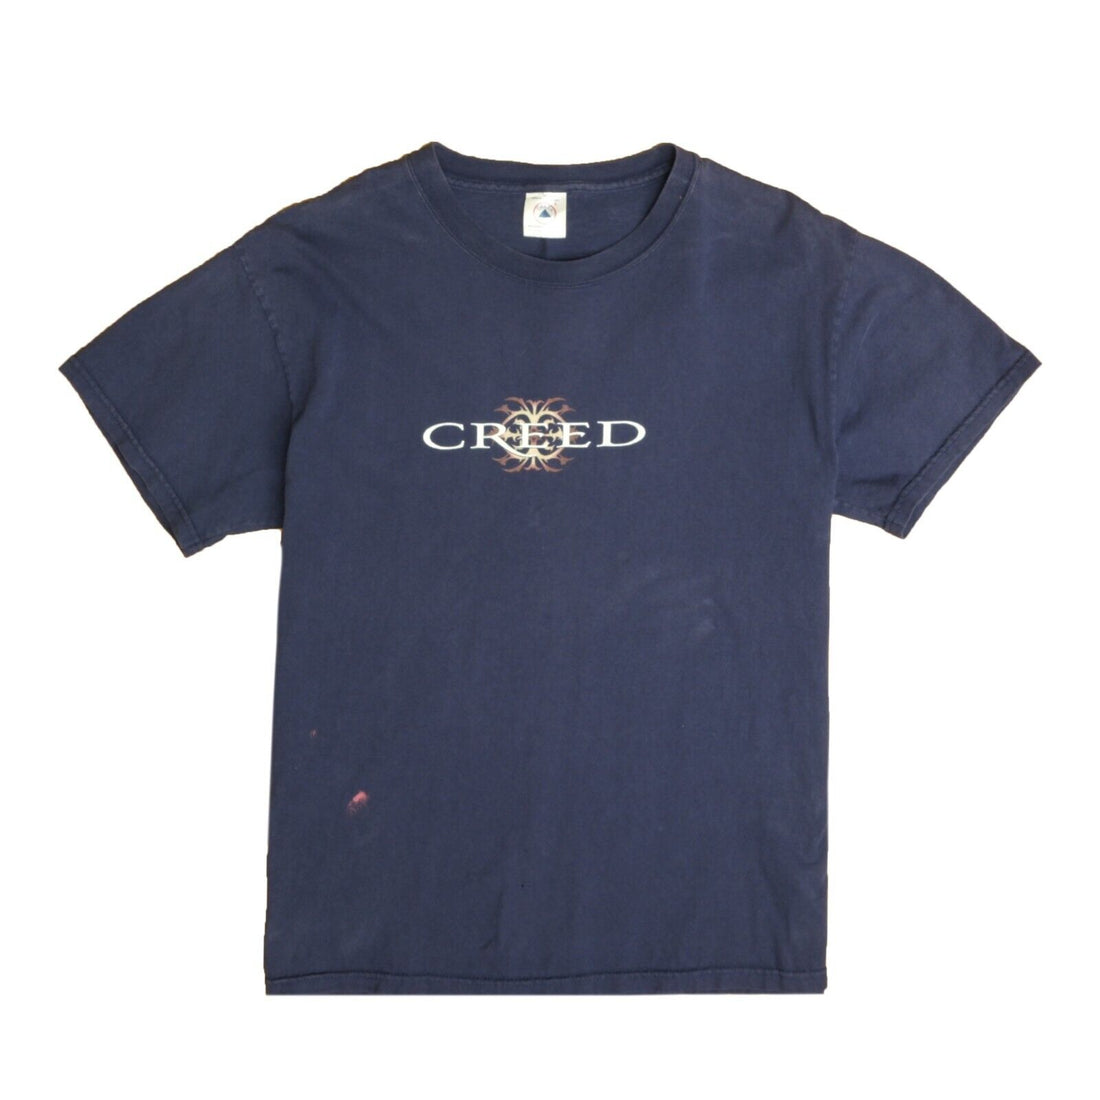 Vintage Creed Human Clay Tour T-Shirt Size Large Blue Band Tee